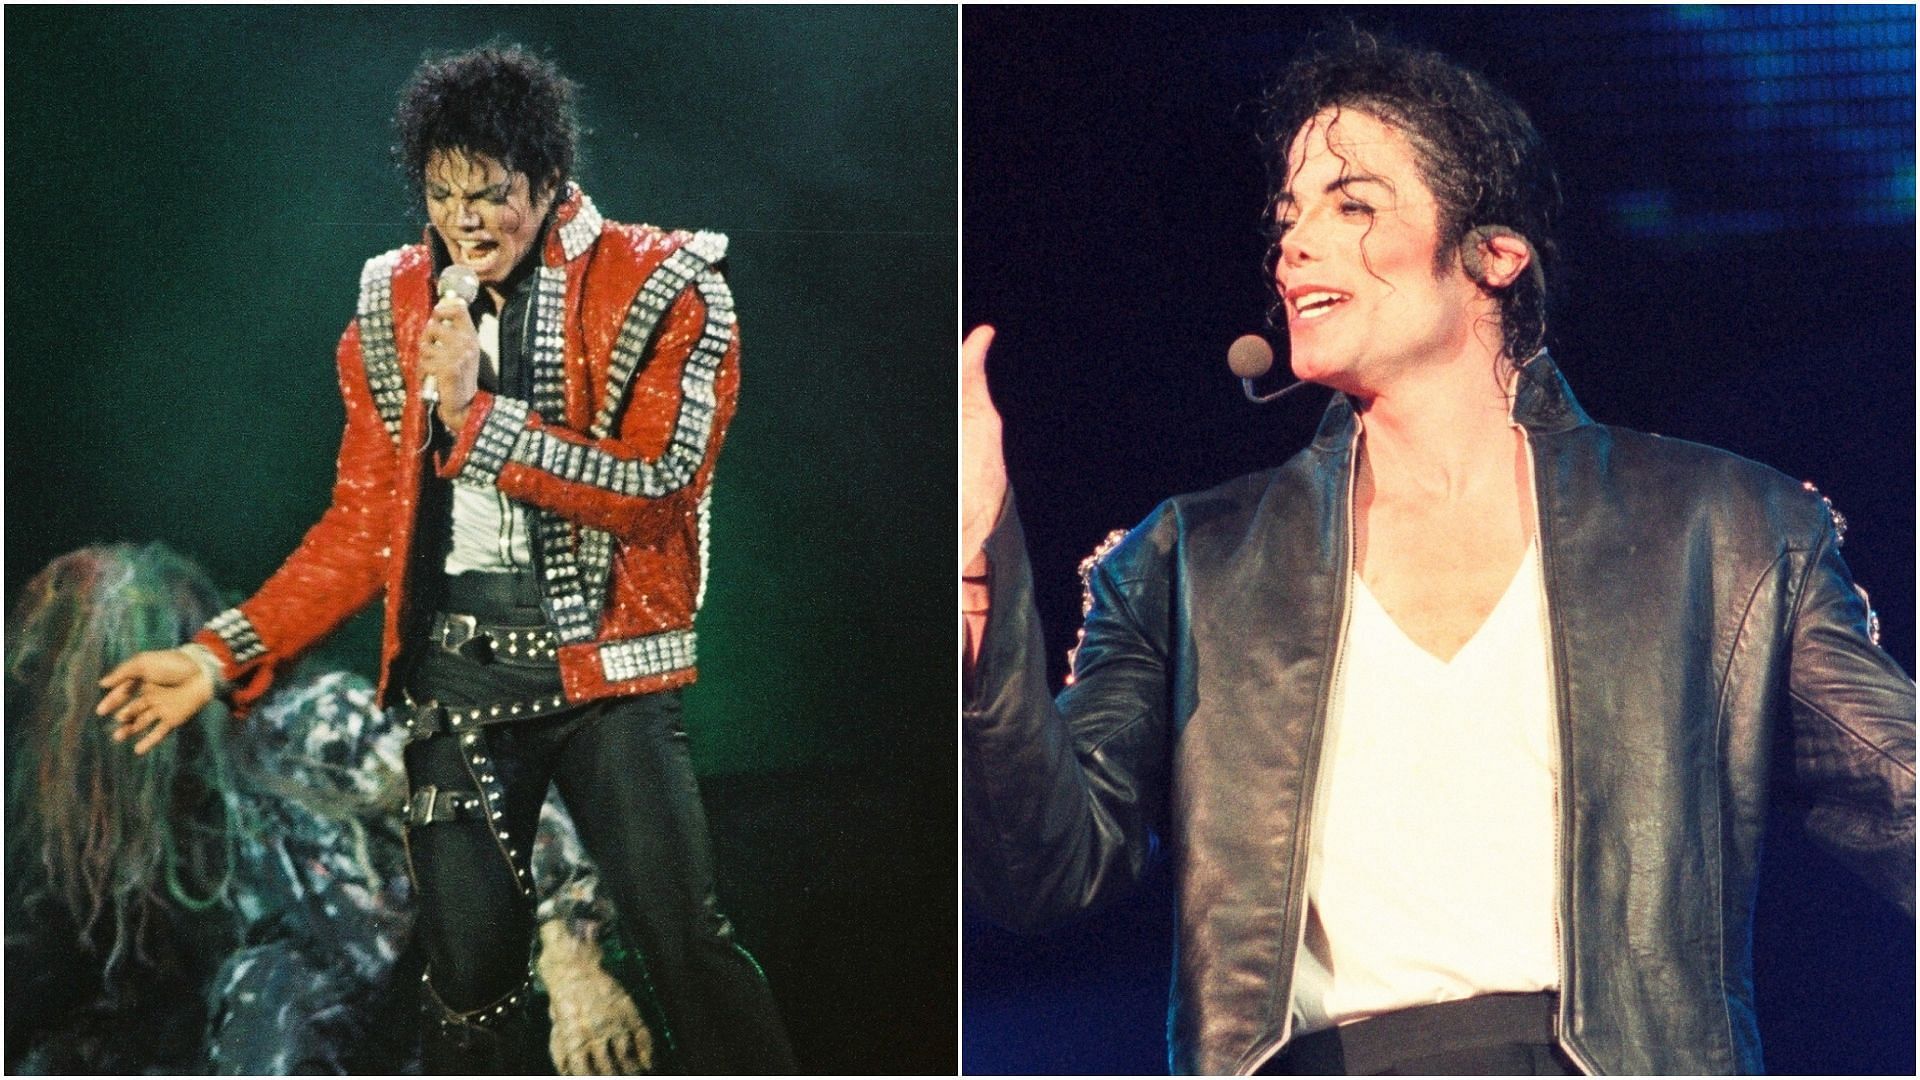 Michael Jackson was ranked at No. 86 on Rolling Stones 200 Greatest Singers of All Time. (Images via Getty)